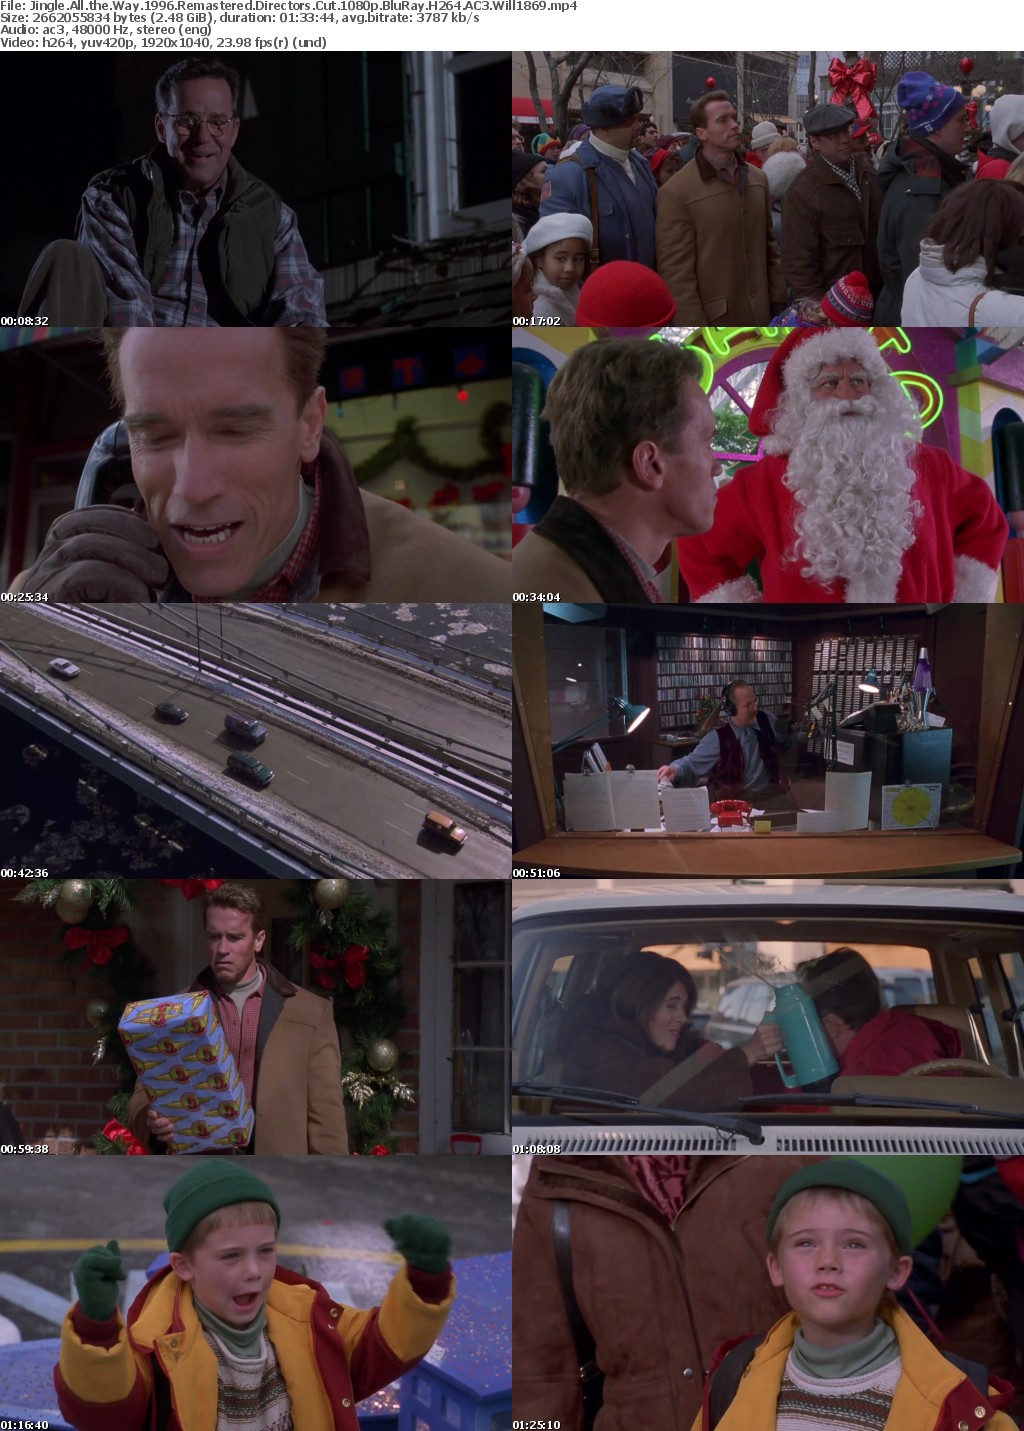 Jingle All the Way 1996 Remastered Directors Cut 1080p BluRay H264 AC3 Will1869